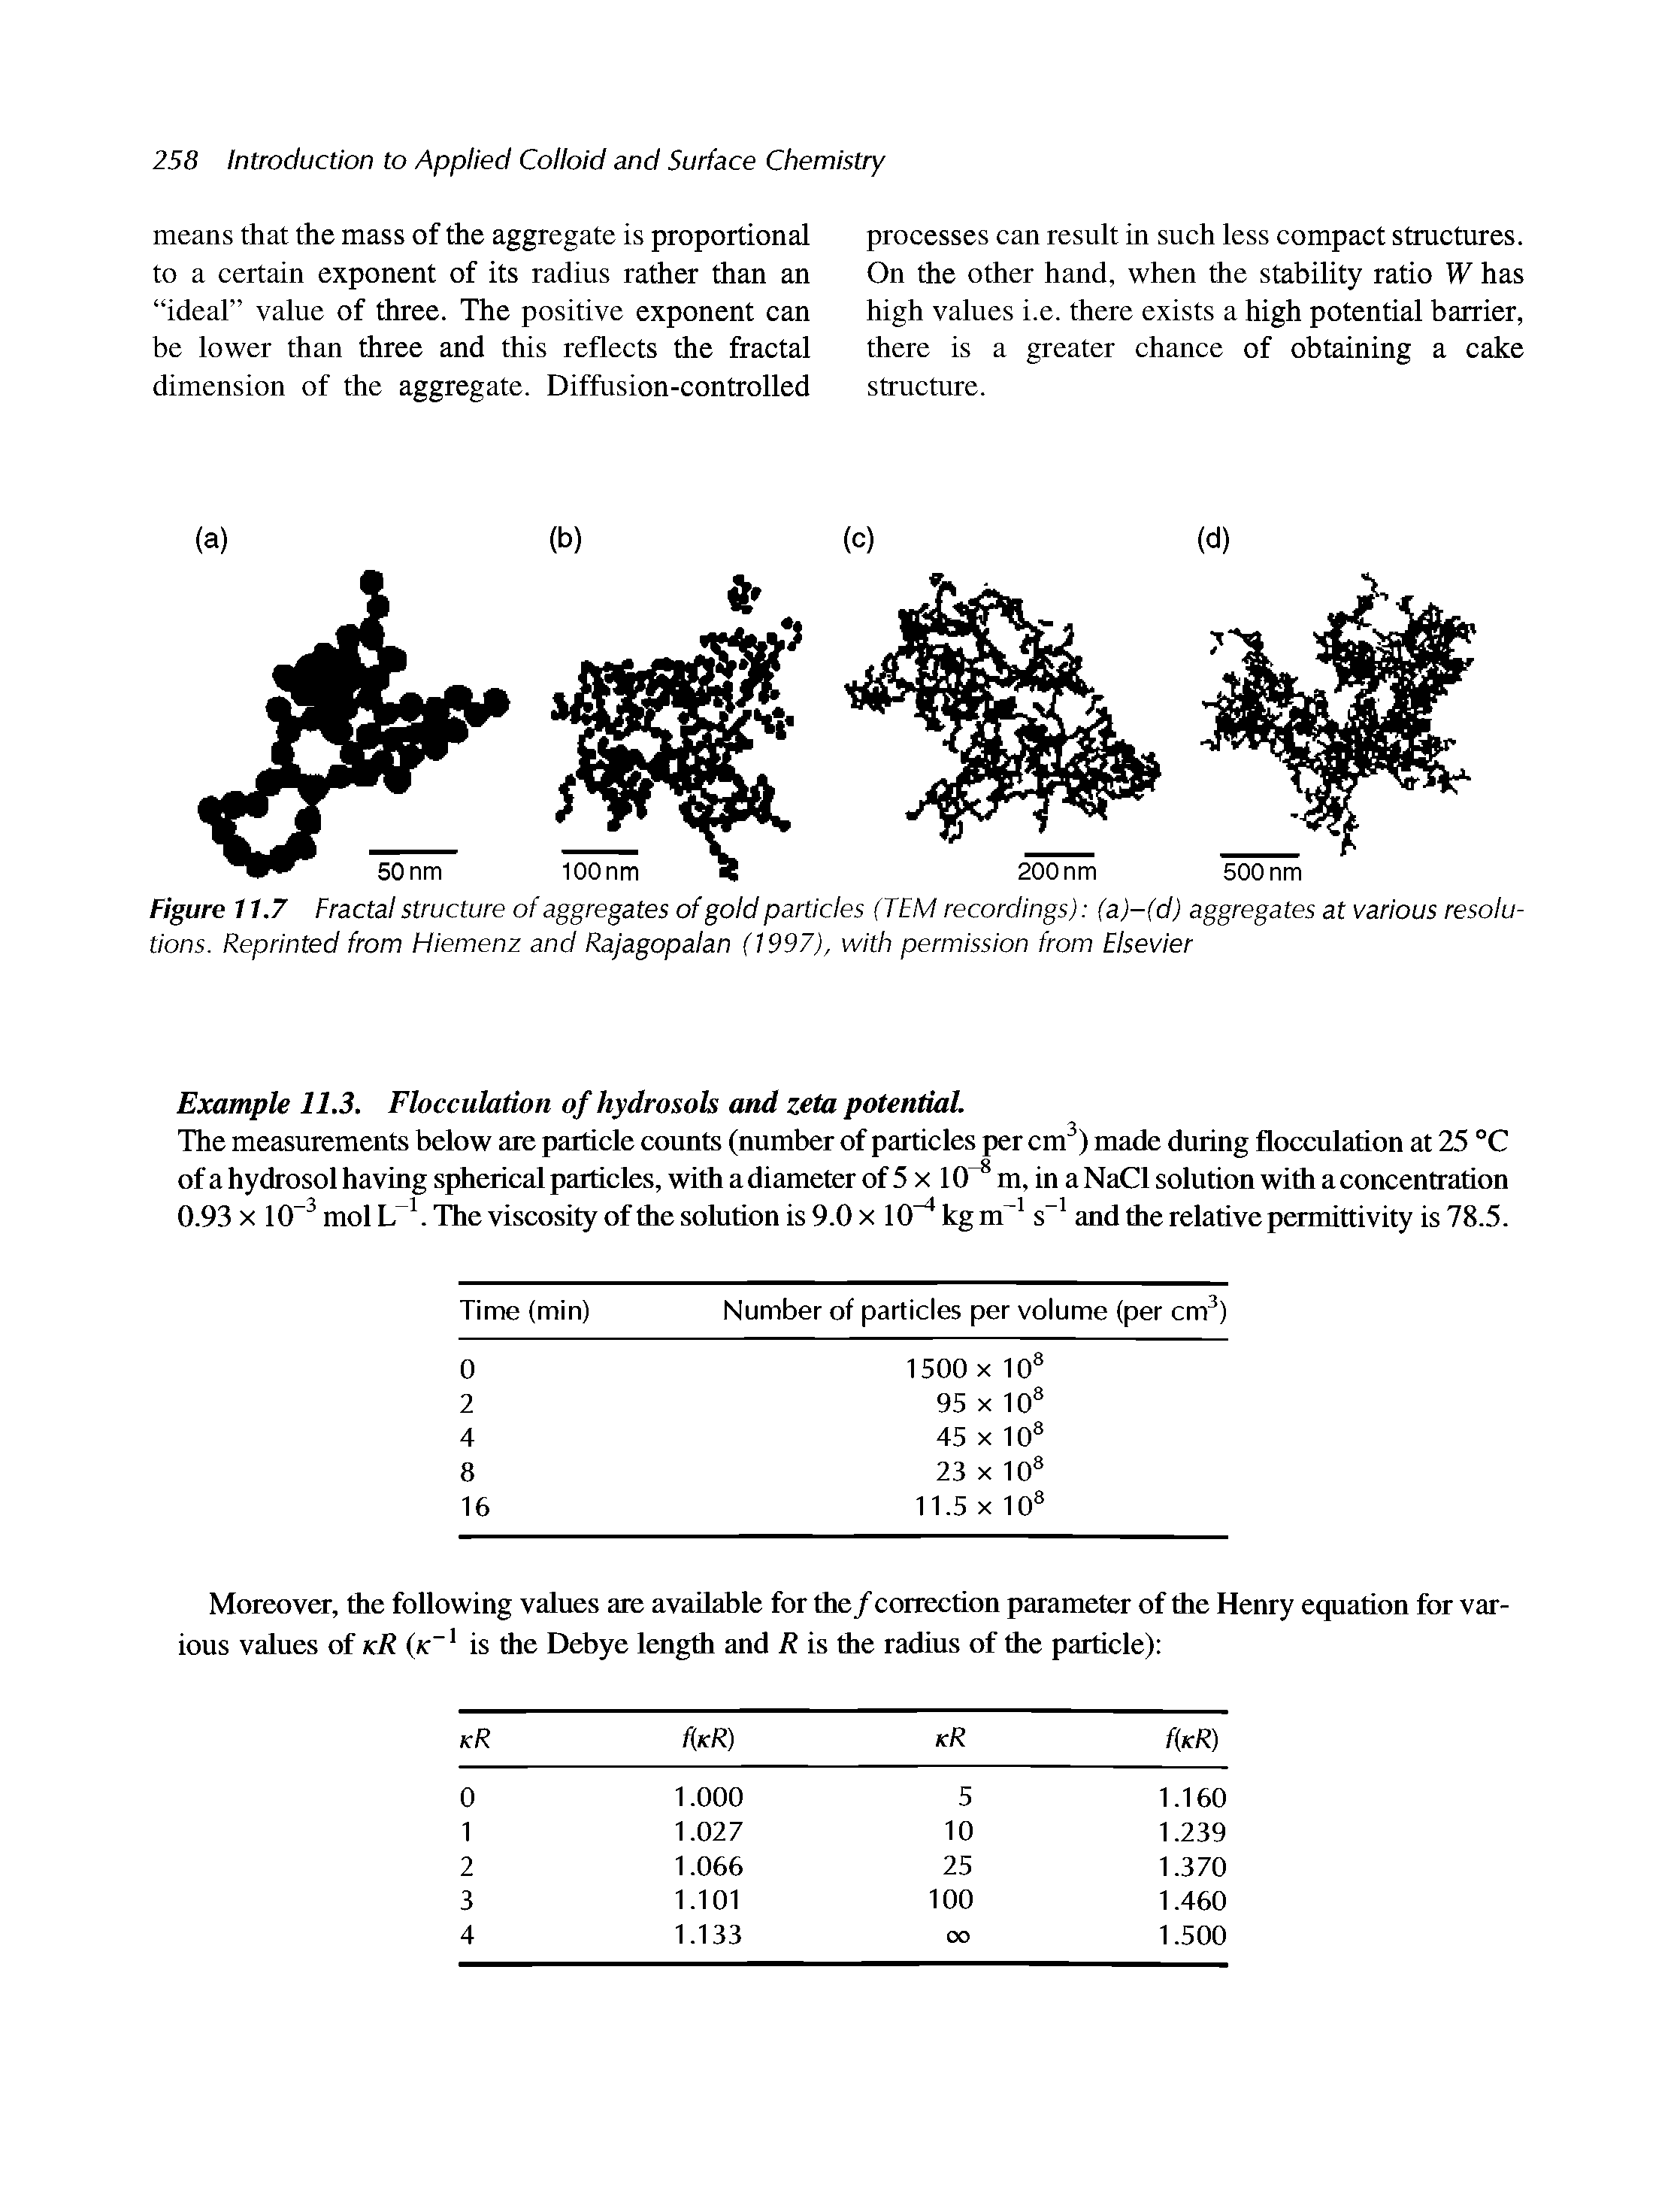 Figure 11.7 Fractal structure of aggregates of gold particles (TEM recordings) (a)-(d) aggregates at various resolutions. Reprinted from Hiemenz and Rajagopalan (1997), with permission from Elsevier...